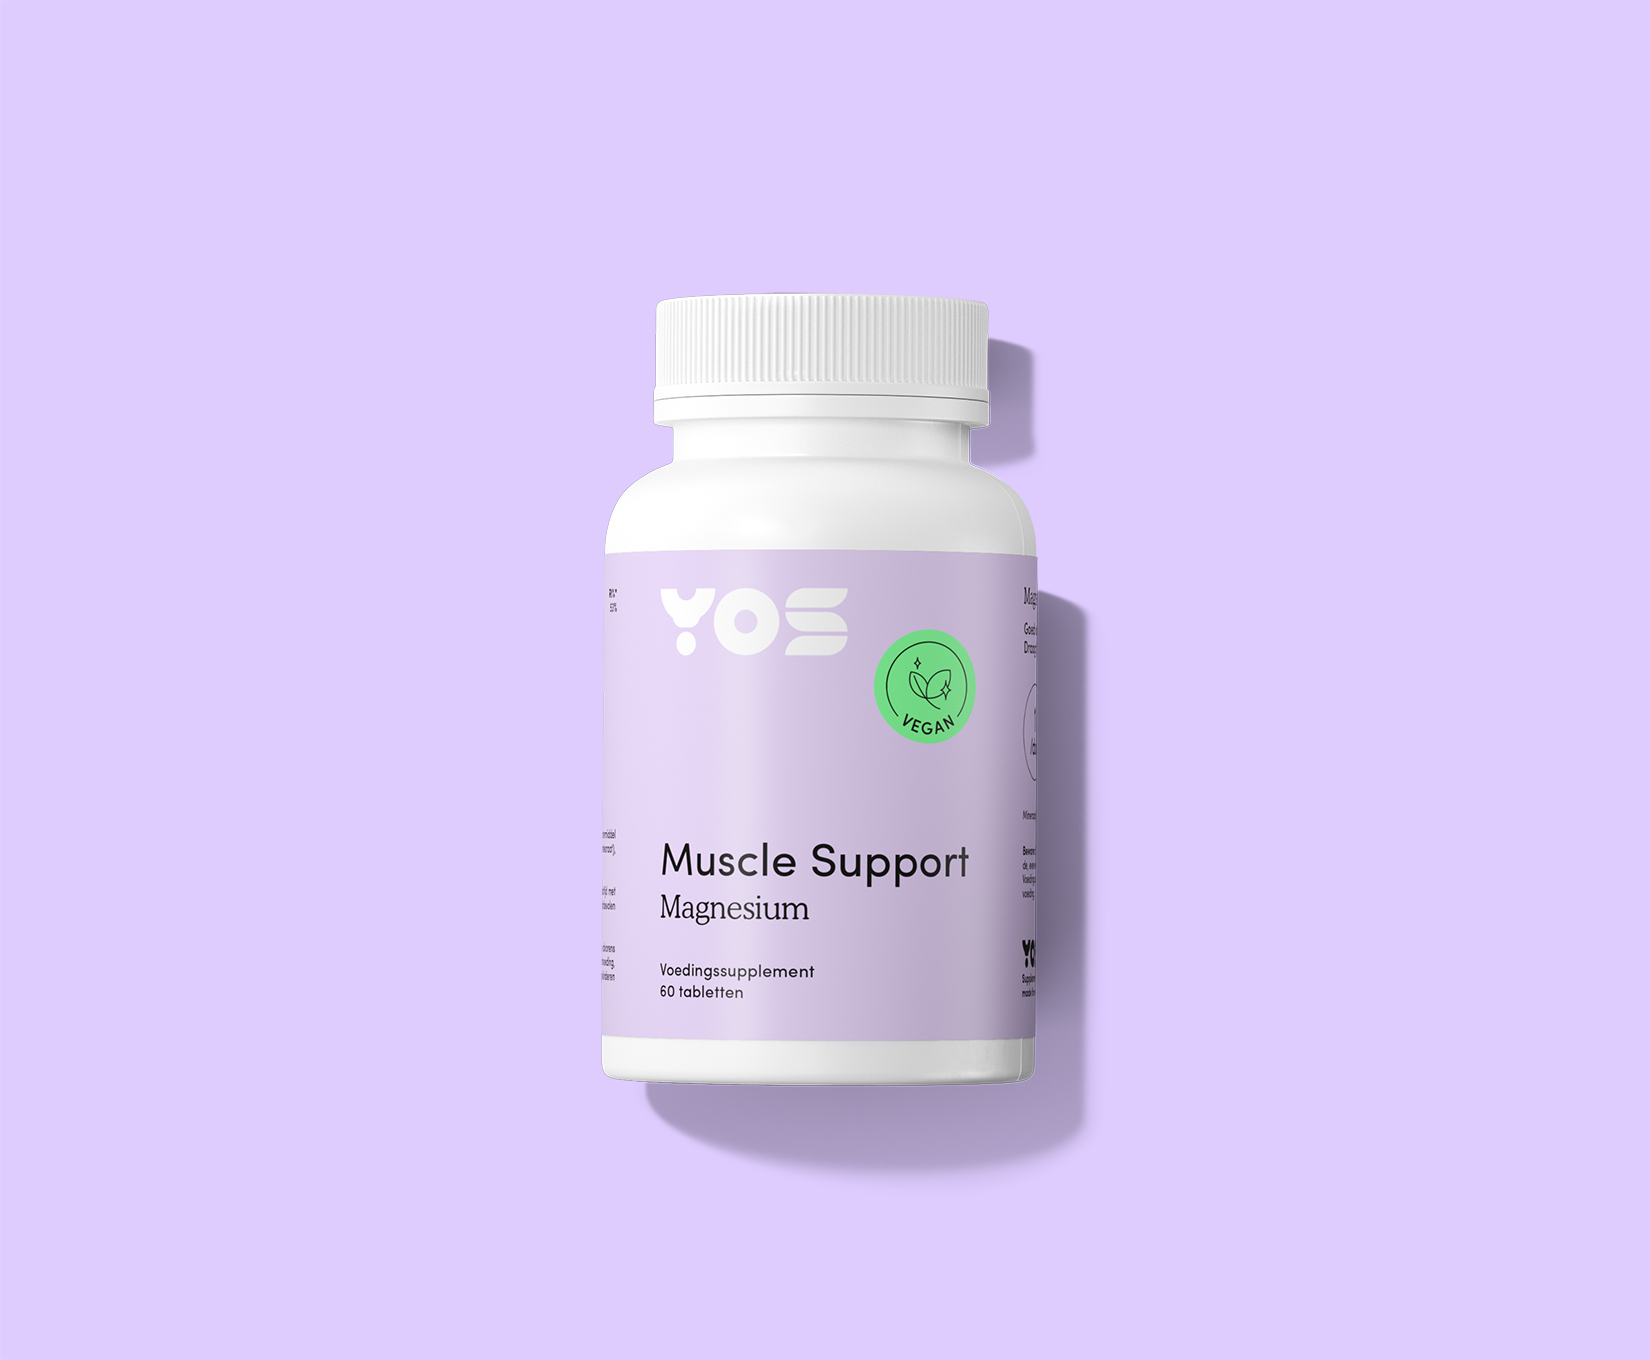 Muscle support